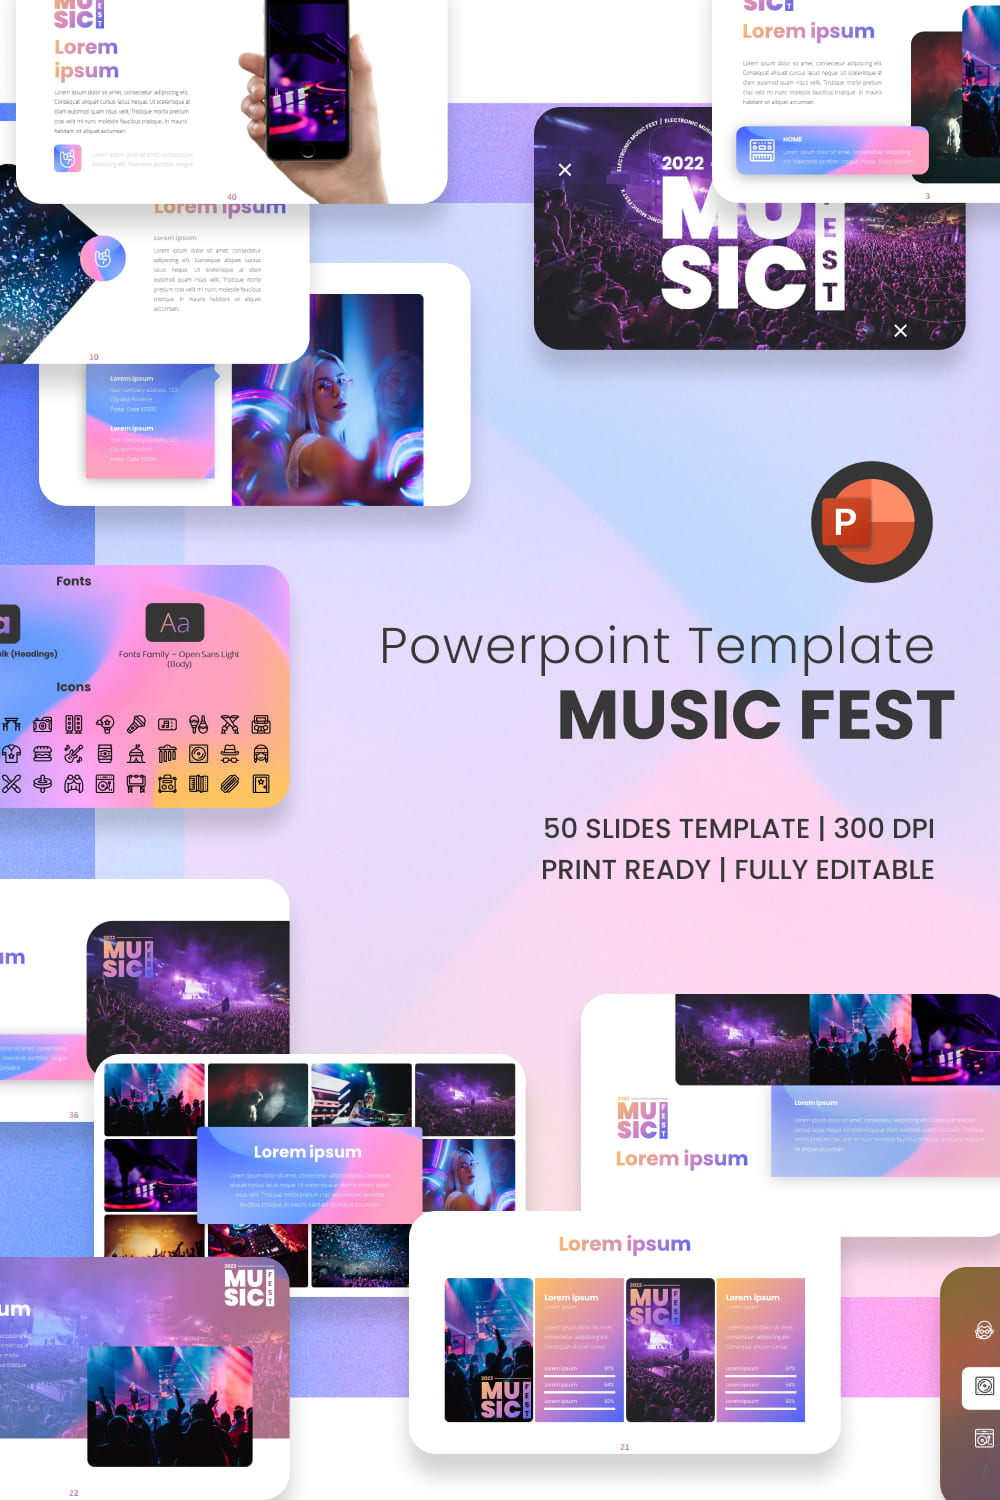 Music Fest Template in PPTX.